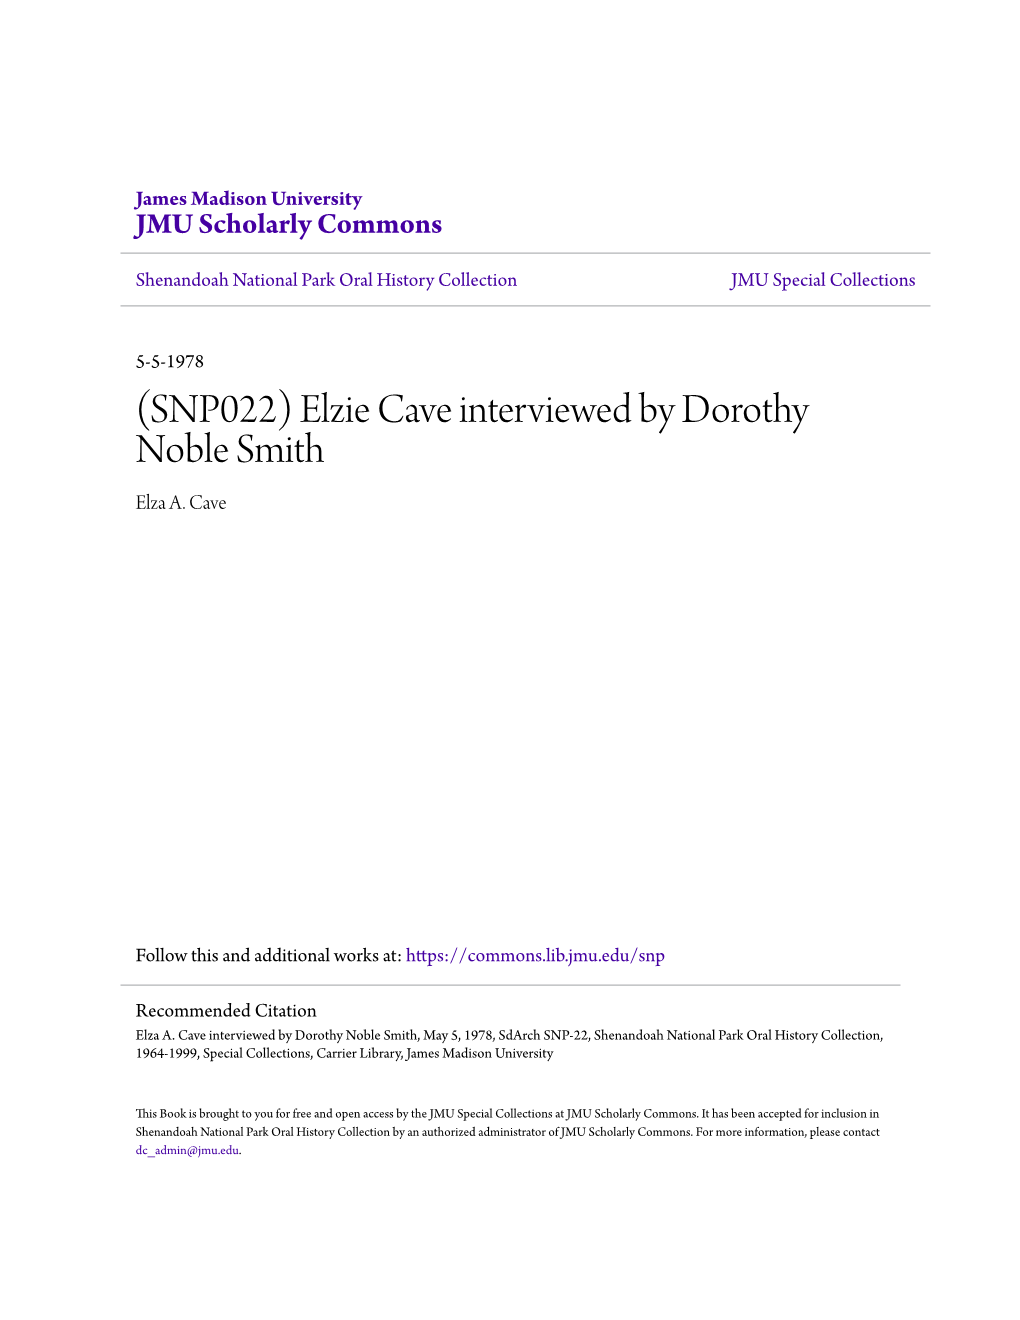 (SNP022) Elzie Cave Interviewed by Dorothy Noble Smith Elza A